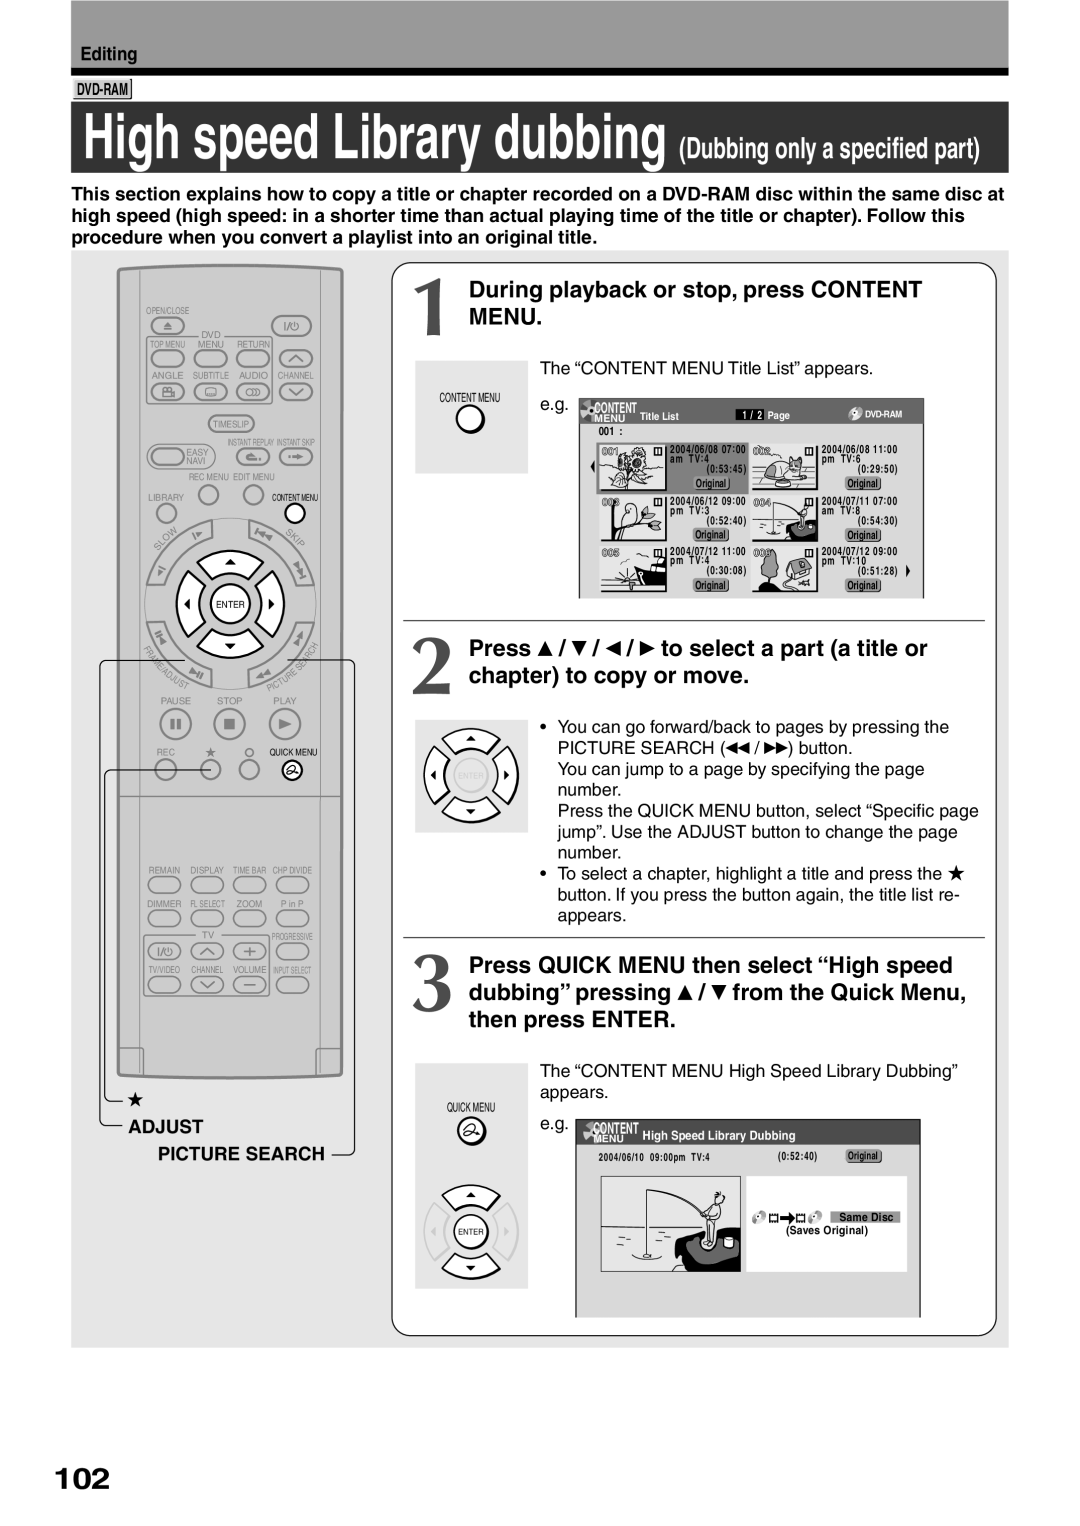 Toshiba D-R2SU, D-R2SC, D-KR2SU During playback or stop, press CONTENT MENU, Adjust Picture Search, Editing, Dvd-Ram 